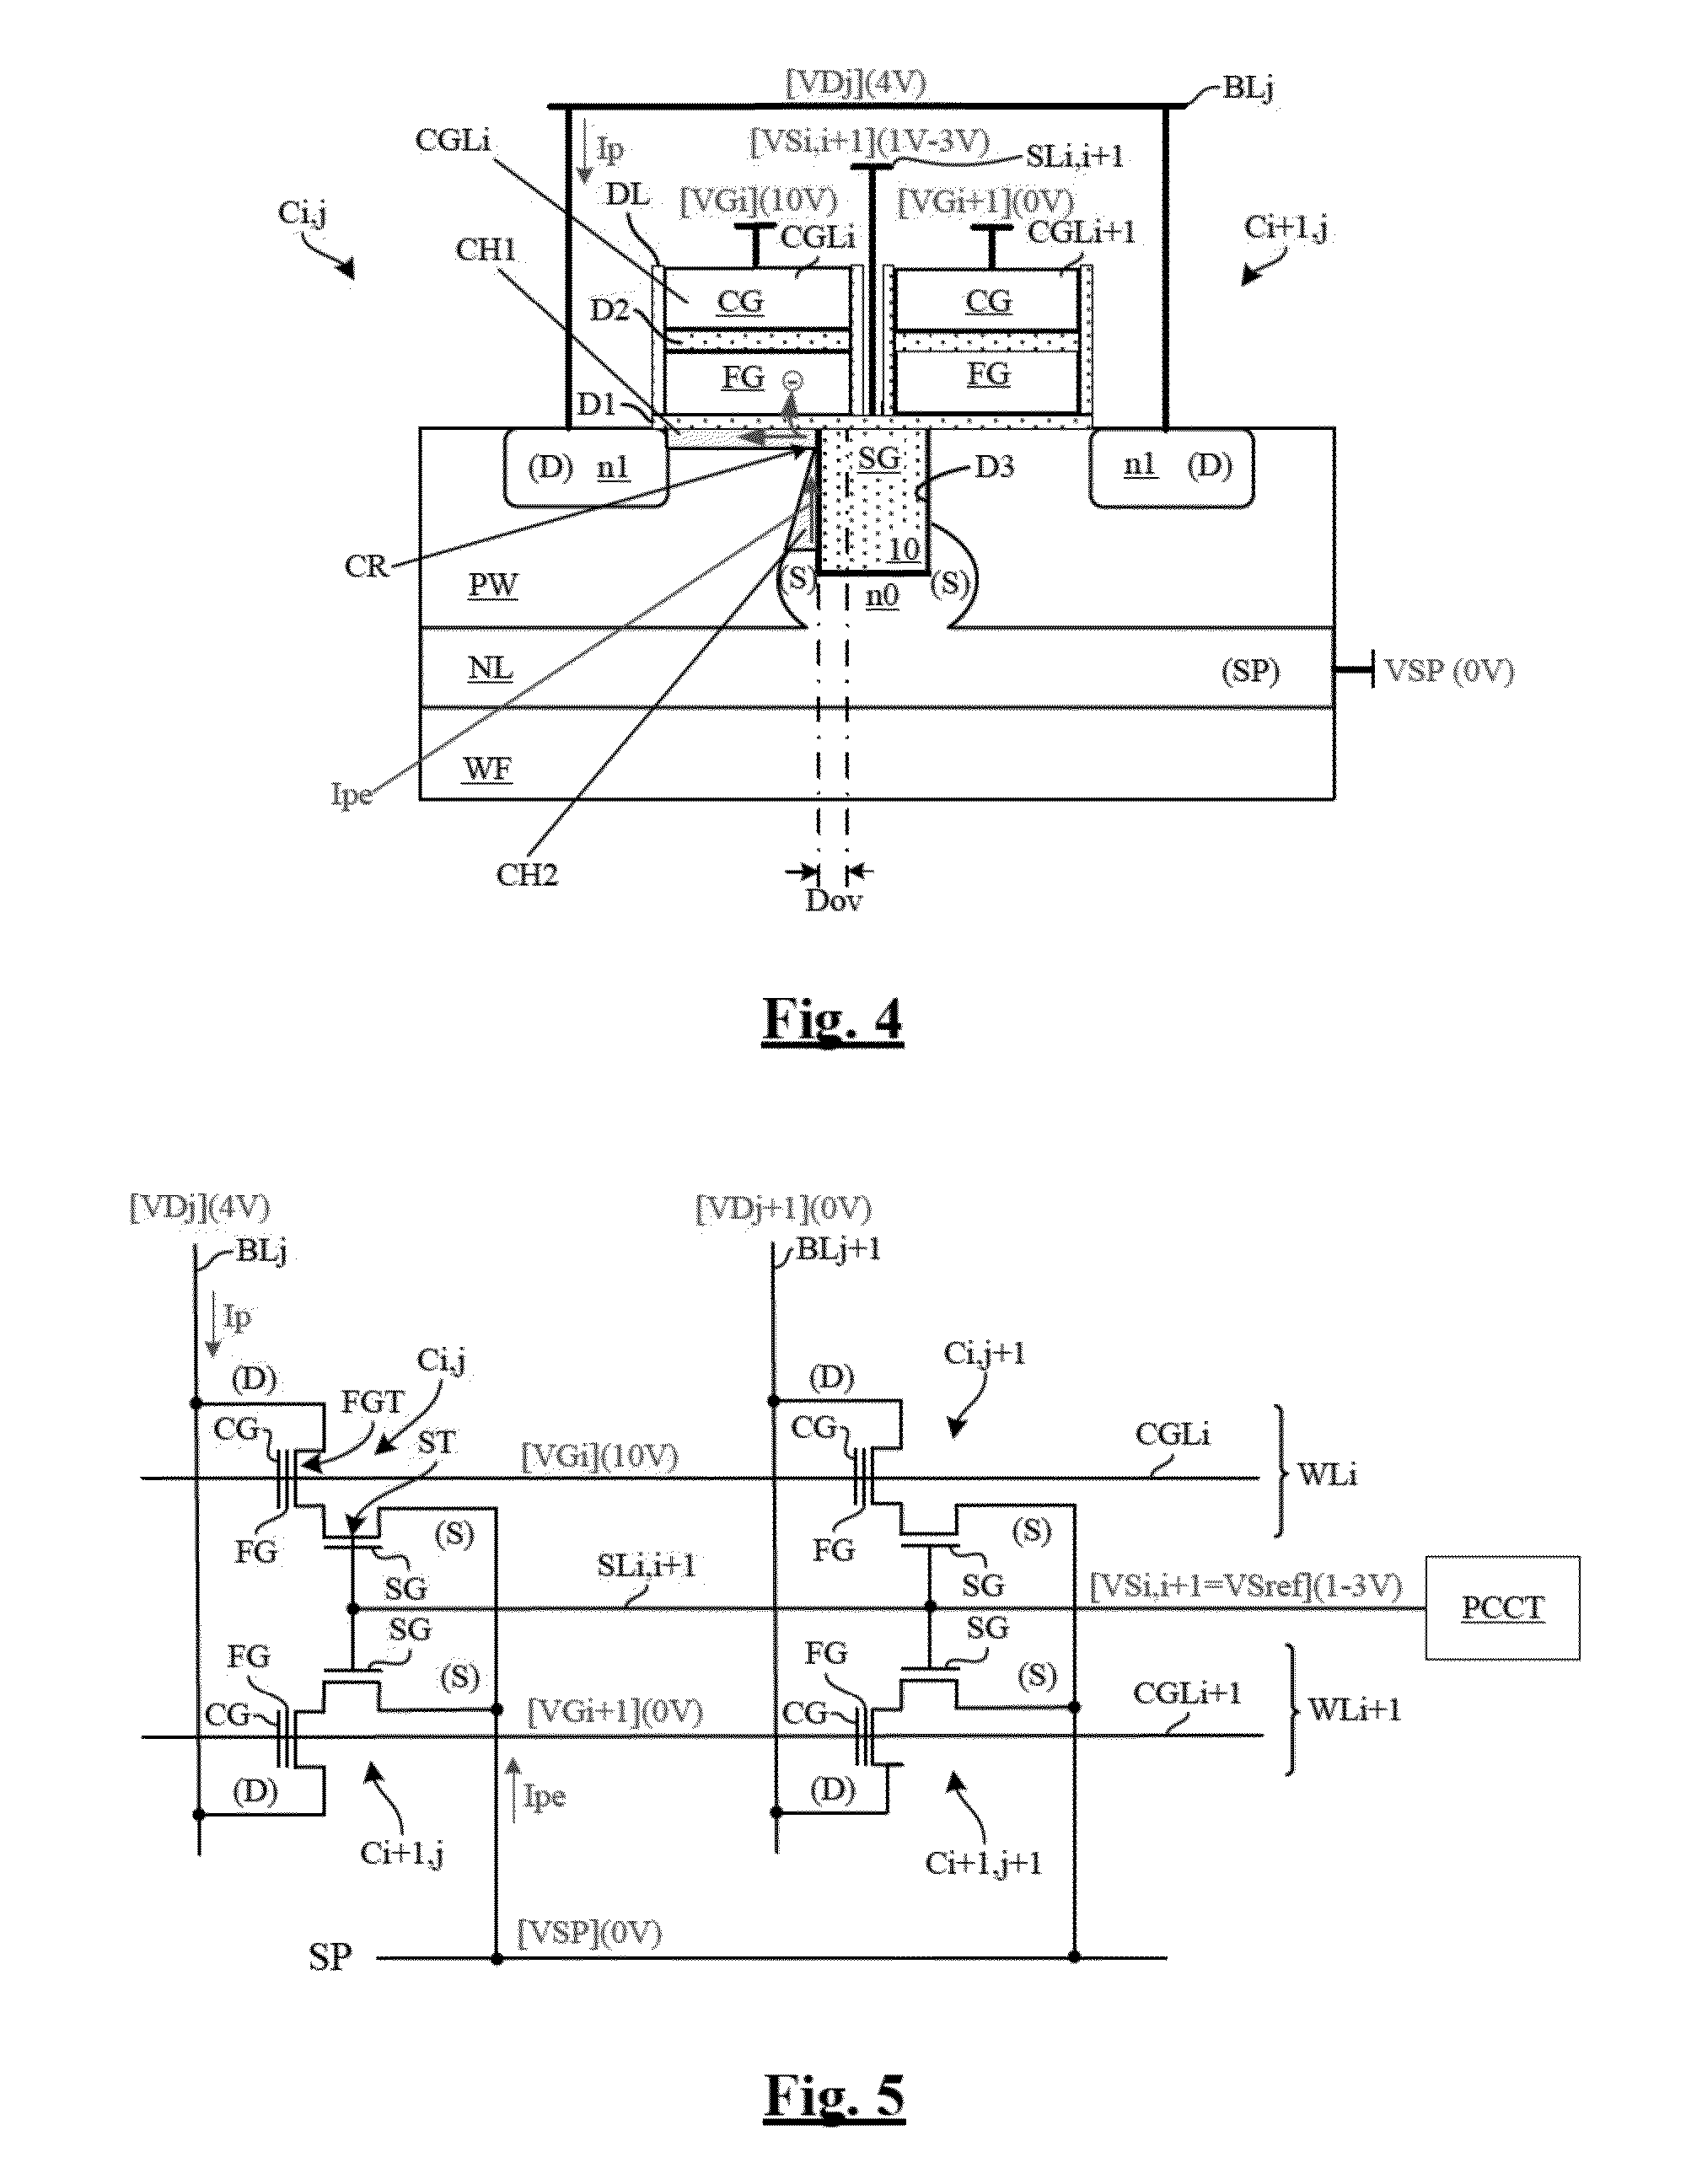 Hot-carrier injection programmable memory and method of programming such a memory